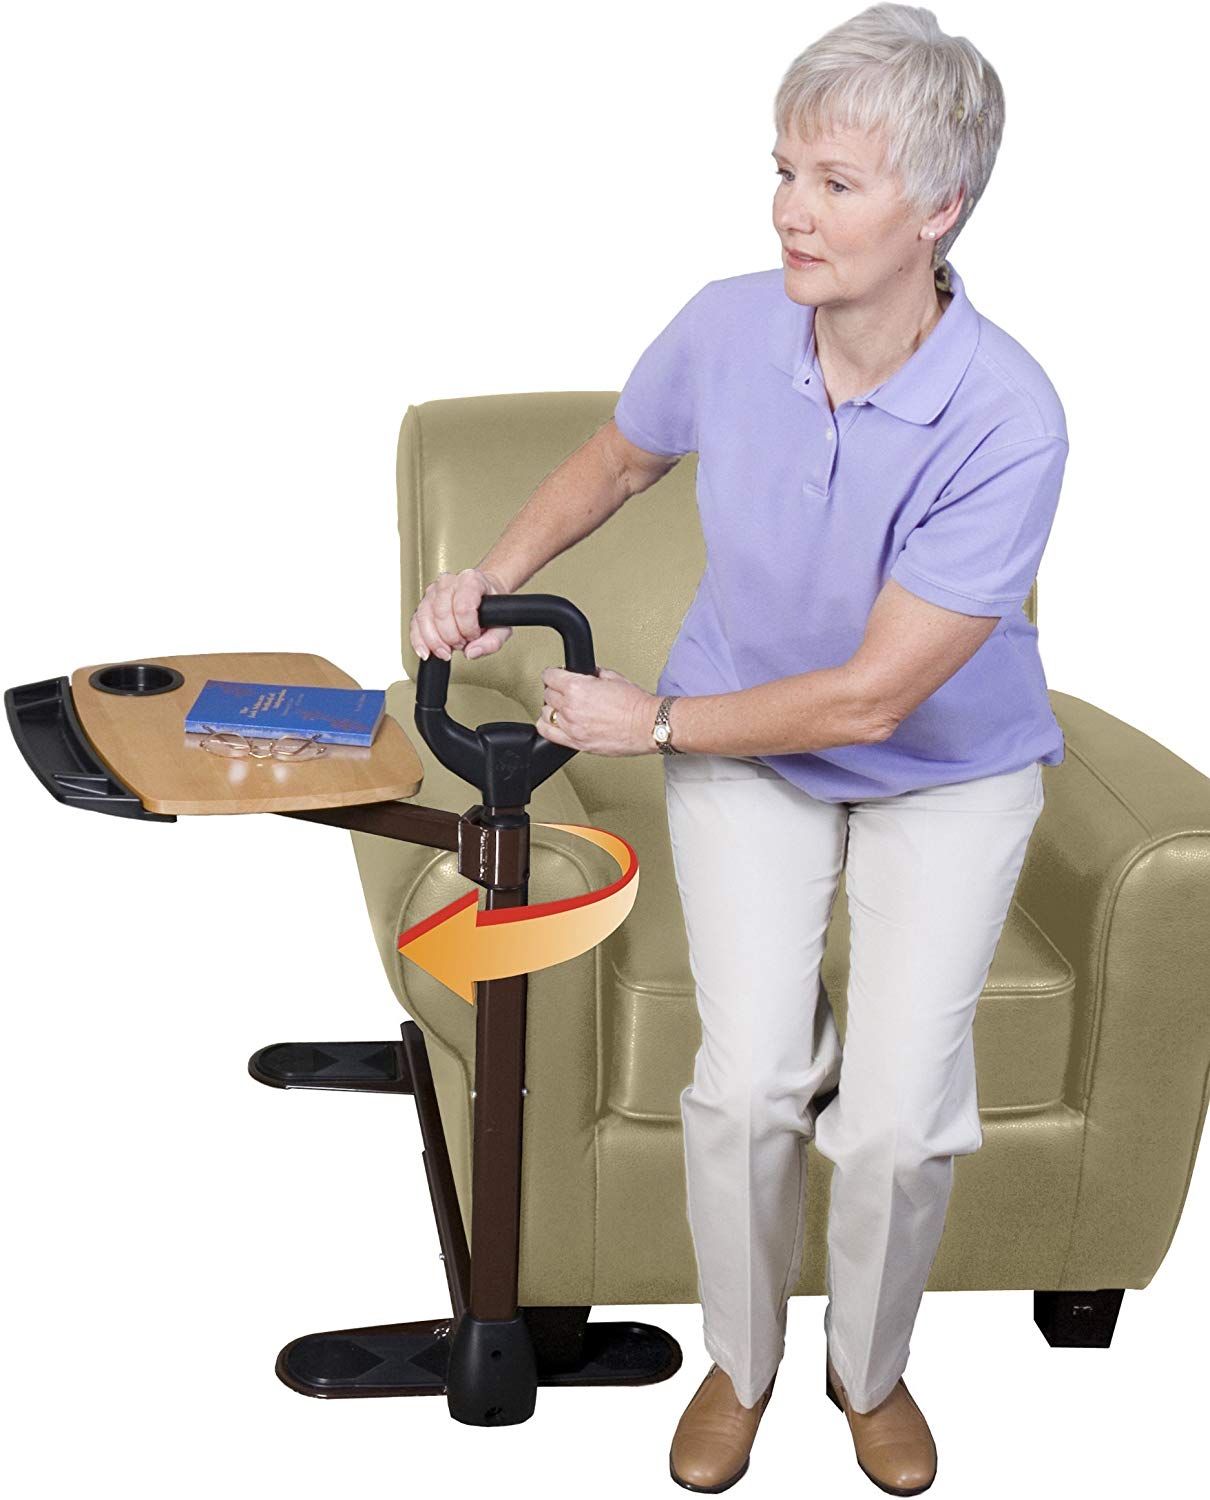 Able Life Able Tray Table, with Ergonomic Stand Assist Safety Handle, Independent Living Aid